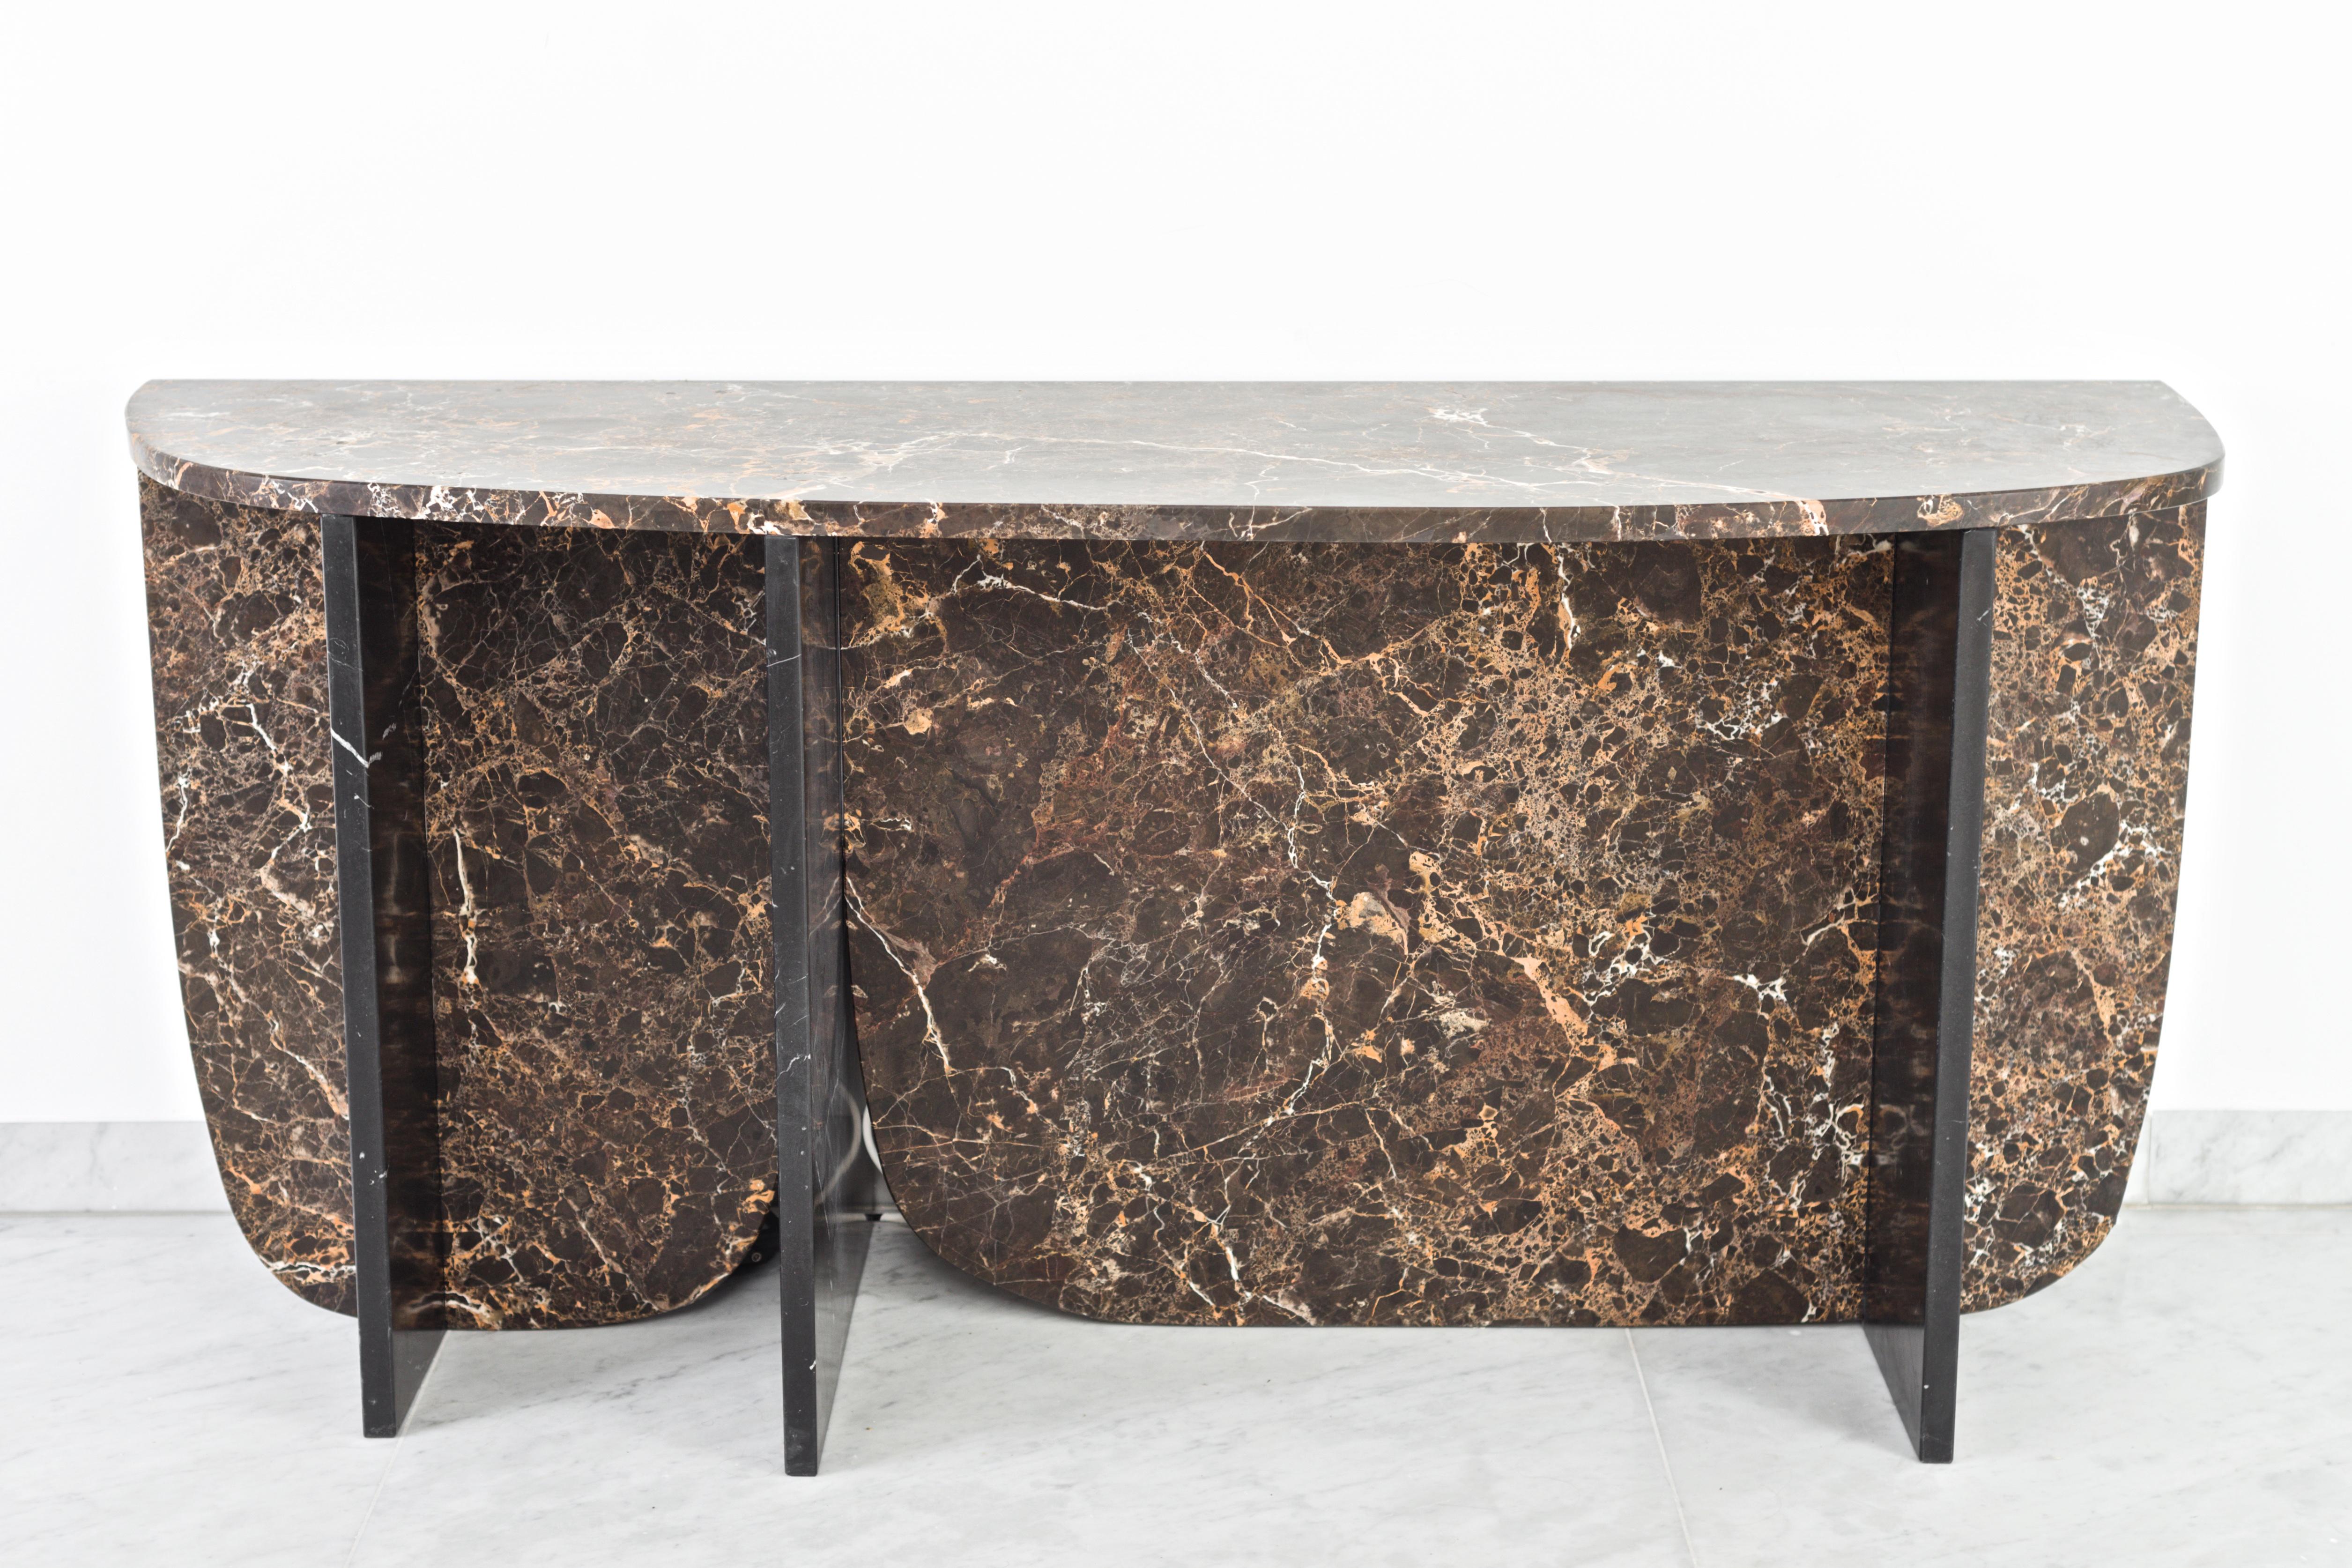 Trilithon marble console by OS And OOS
Dimensions: 180 x 59 x 81 cm
Materials: Emperador gold and nero marquina.


Studio OS And OOS is design studio for small objects to larger spatial concepts;
the studio tries to find the balance between